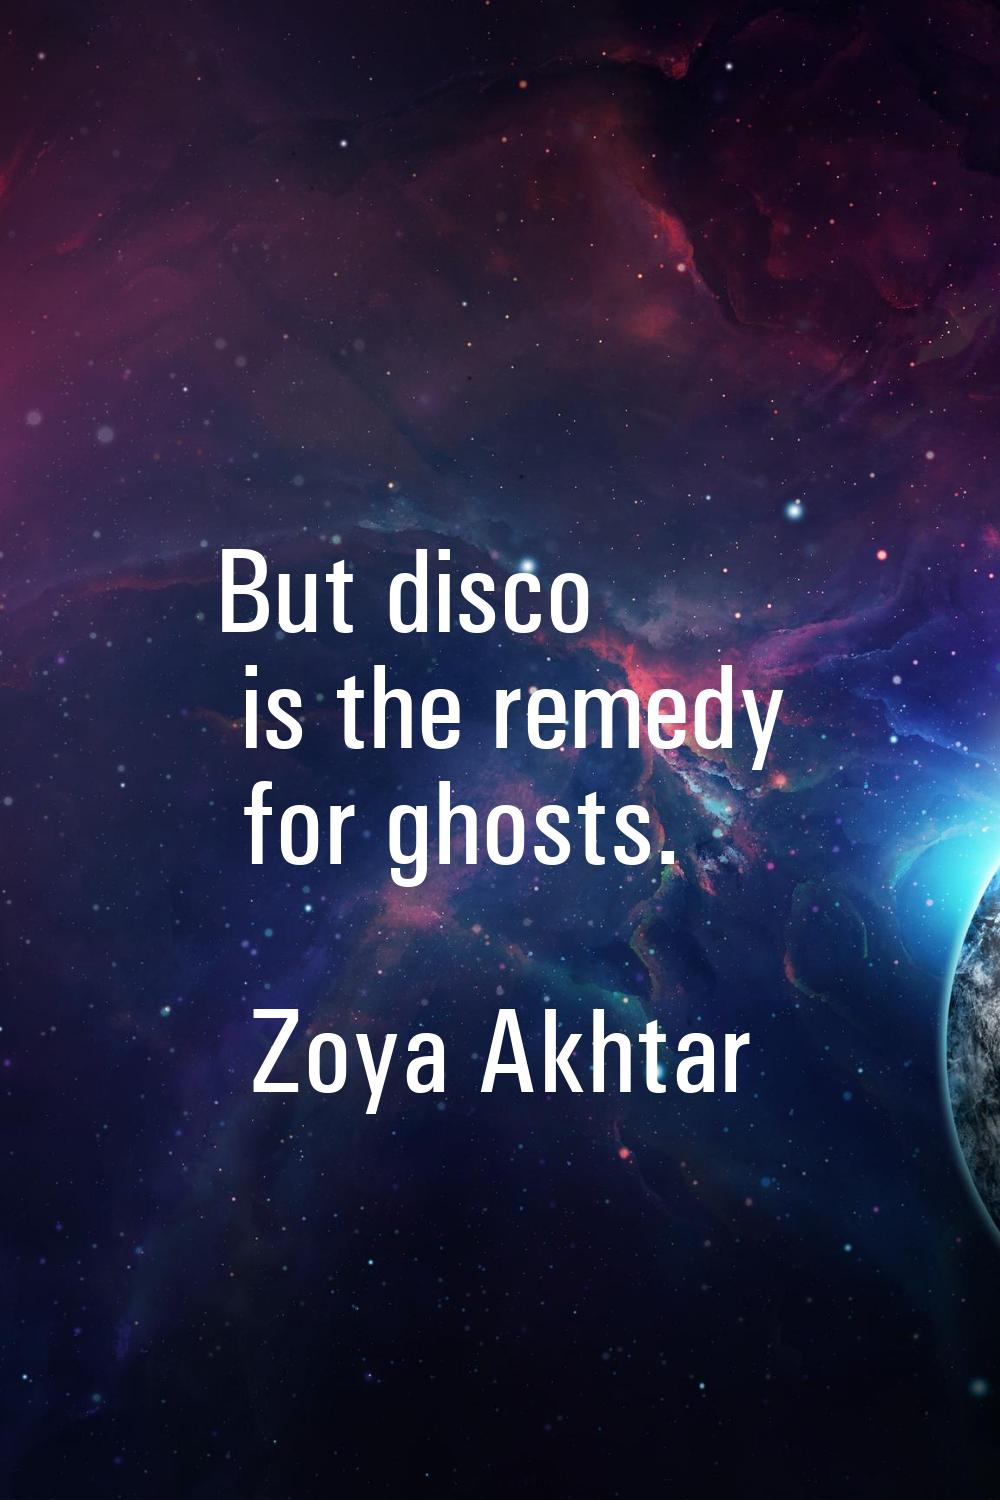 But disco is the remedy for ghosts.